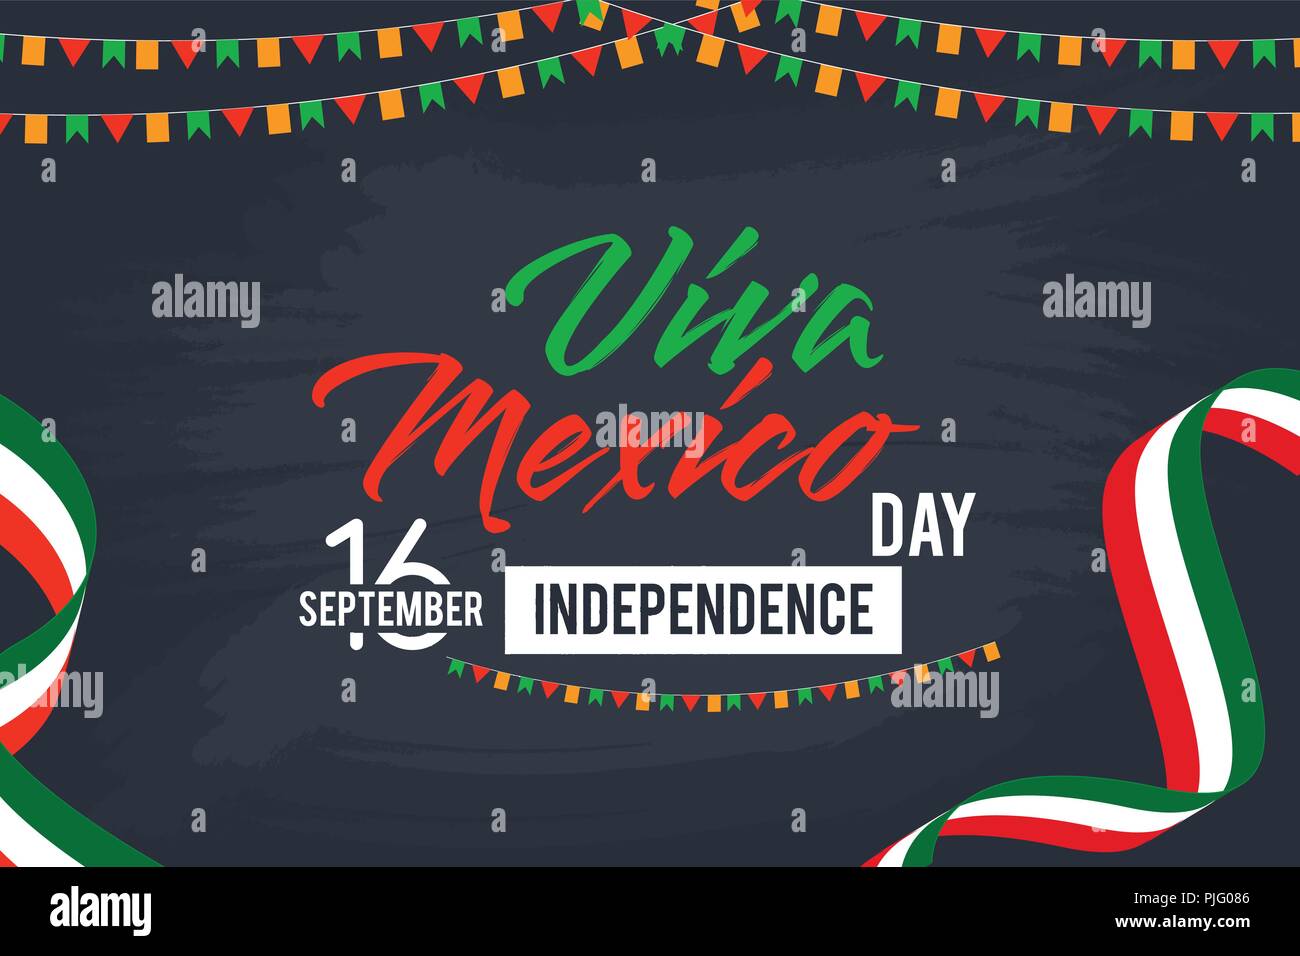 Viva Mexico Happy Independence Day Vector Background Stock Vector